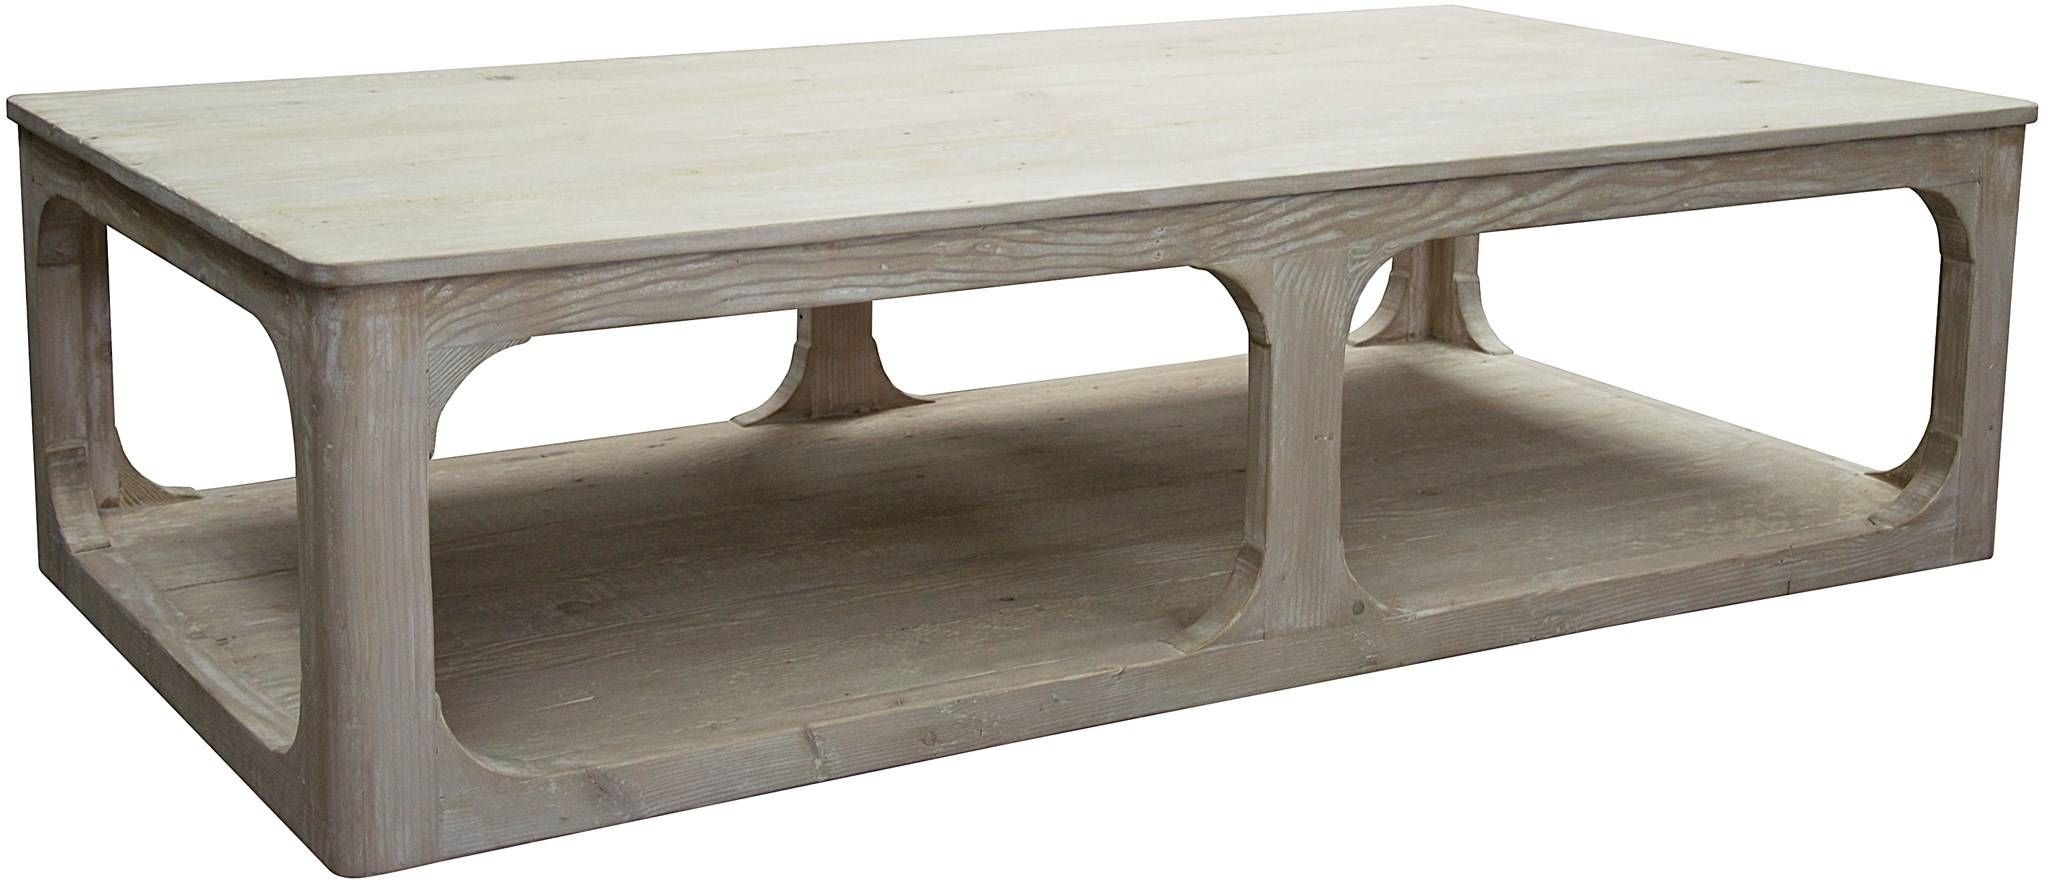 Cfc :: Pertaining To Grey Wash Coffee Tables (View 8 of 30)